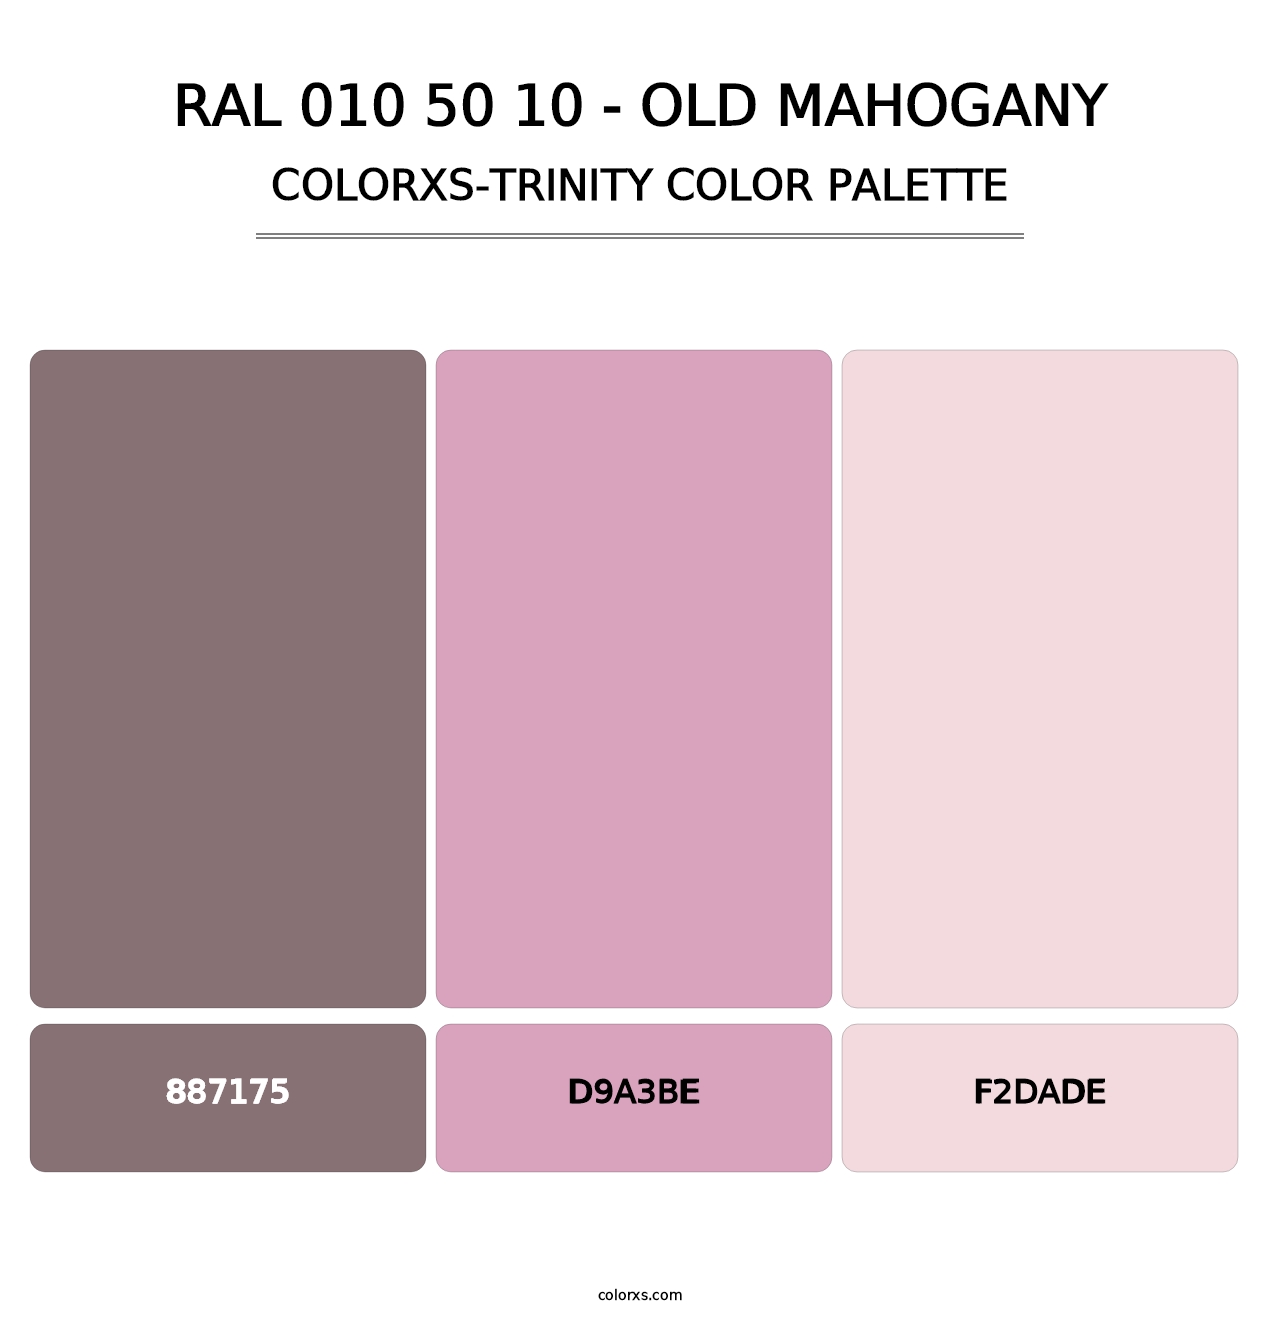 RAL 010 50 10 - Old Mahogany - Colorxs Trinity Palette